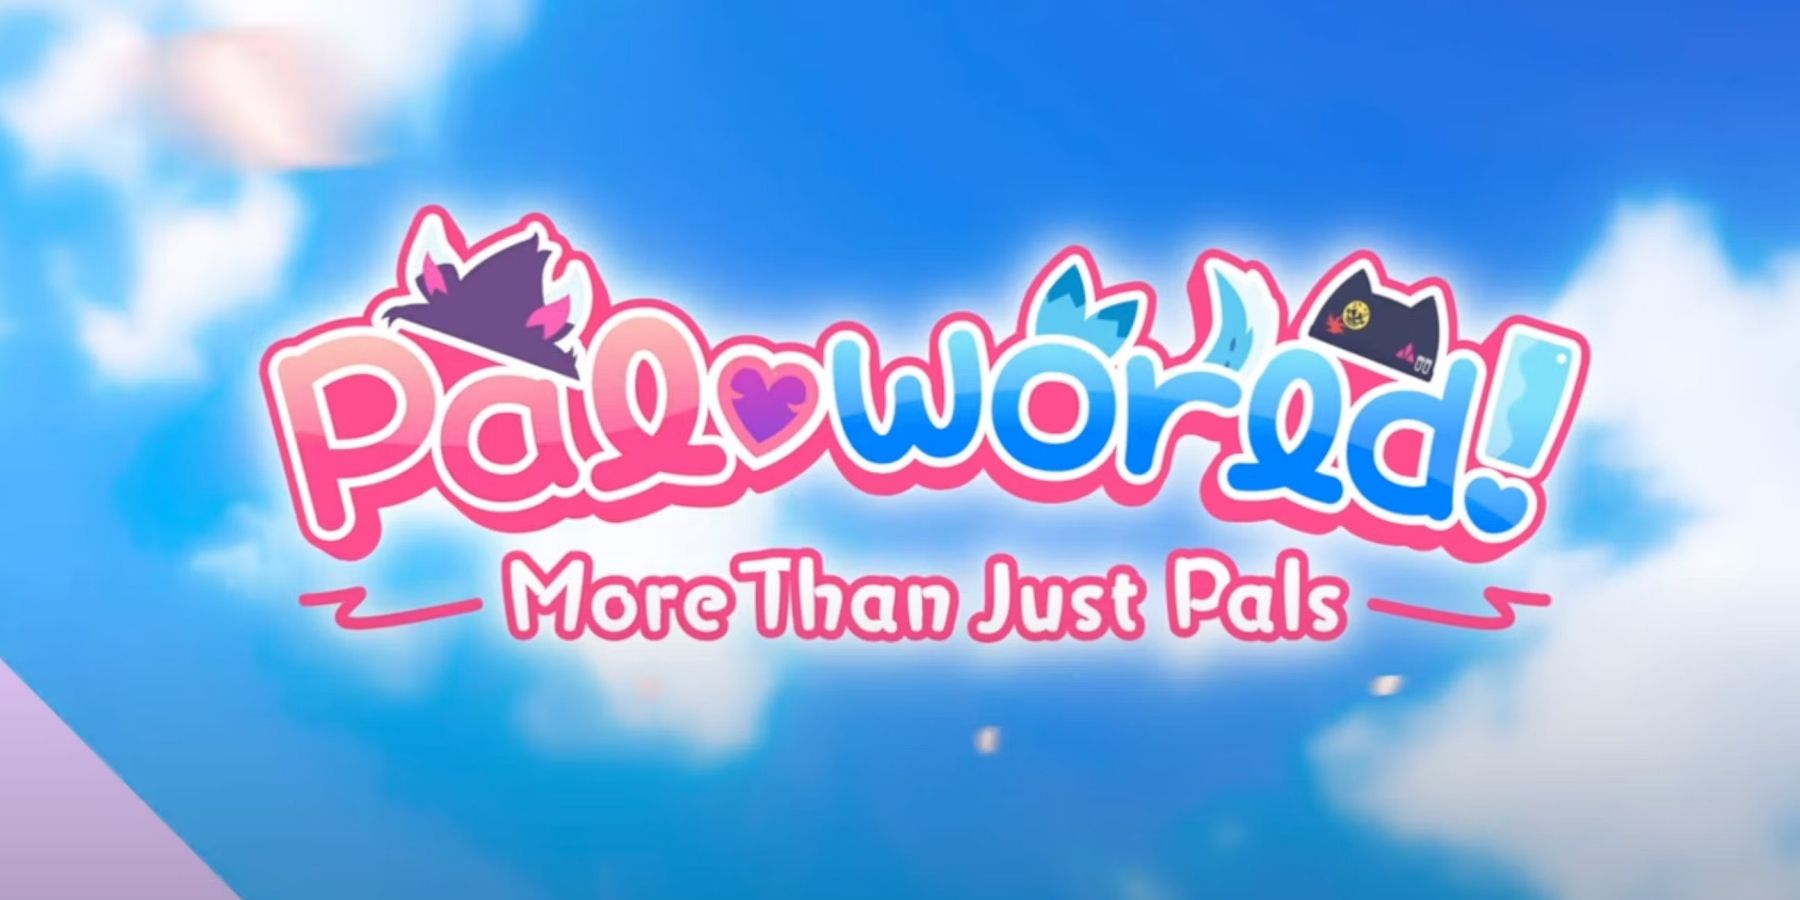 palworld-fans-want-dating-sim-april-fools-joke-to-be-a-real-thing